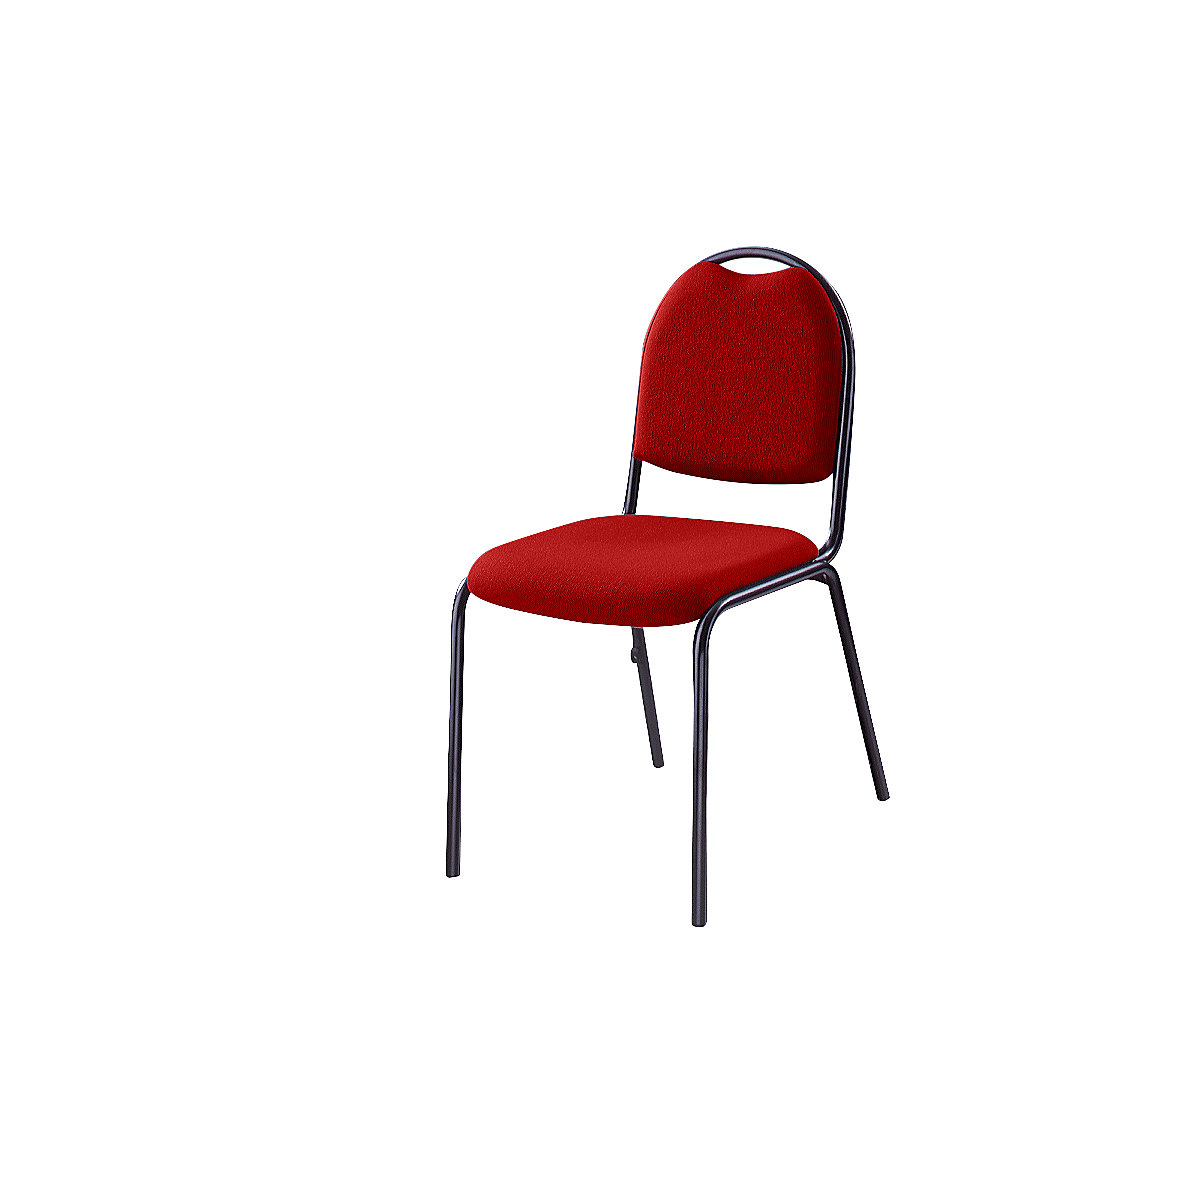 Conference and meeting room chair - eurokraft pro